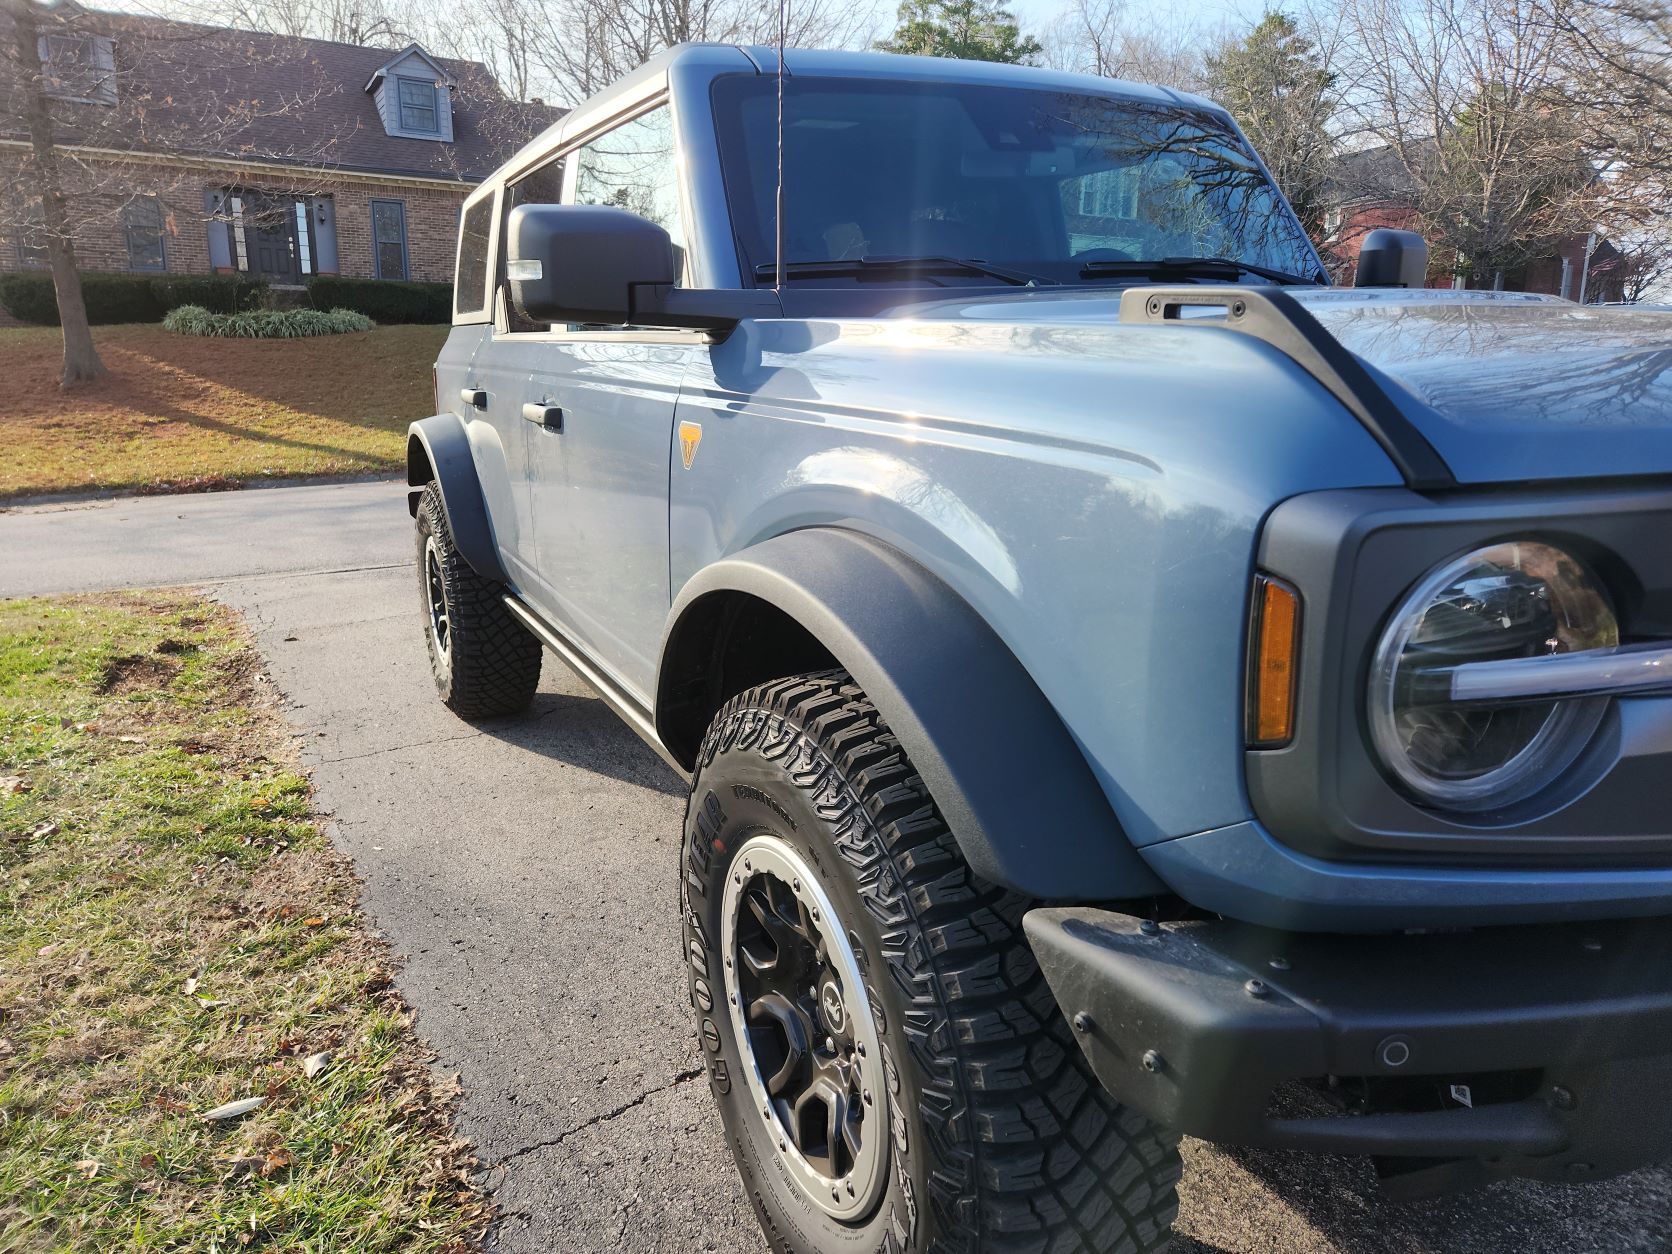 Ford Bronco Azure Gray vs Area 51 colors side-by-side comparison pics + AGM in the sun Close Up Passenger Sun